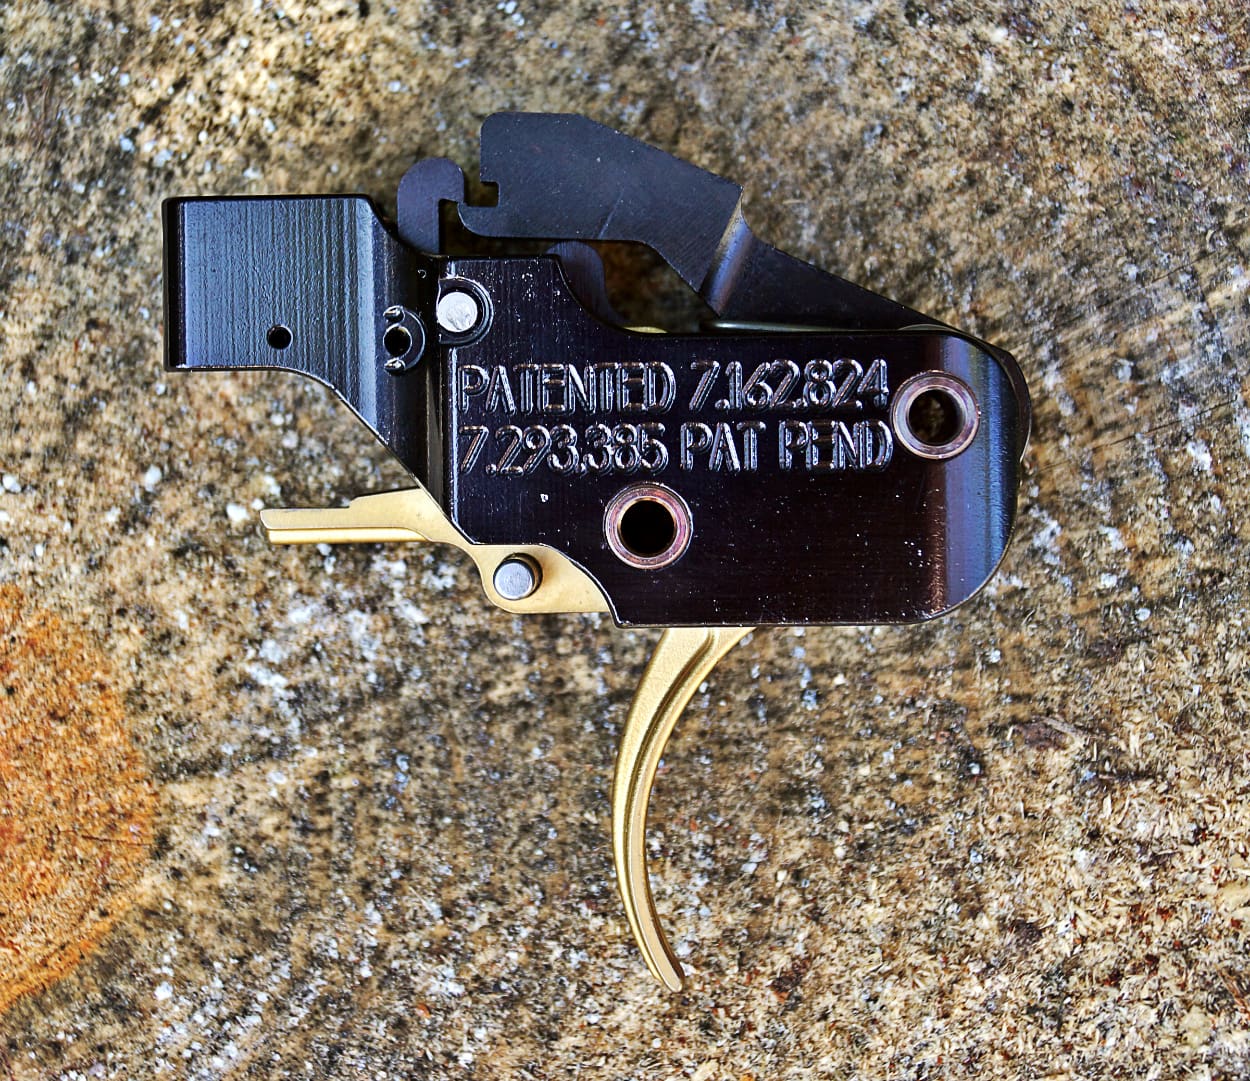 The AR-15 Drop-In Trigger Roundup AR-gold